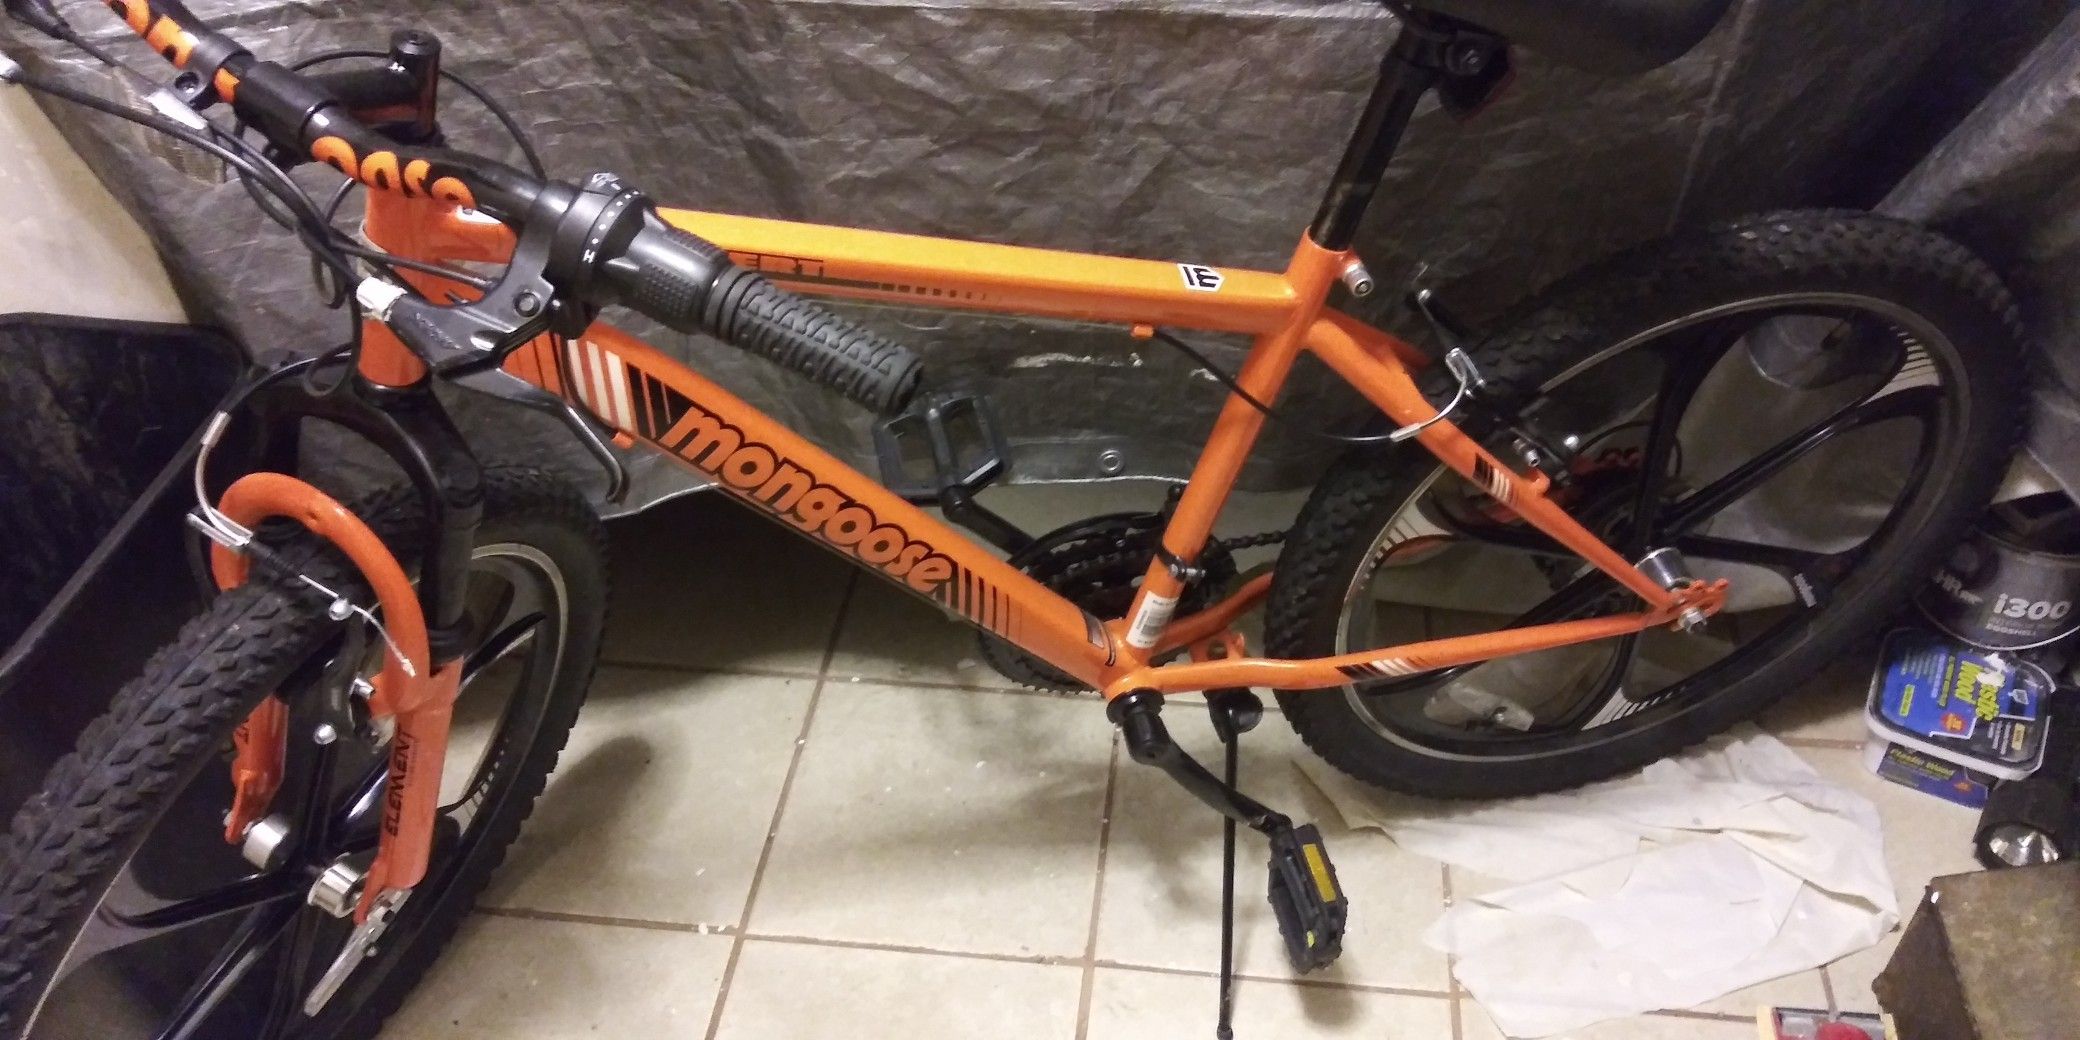 Brand new Mongoose Mountain Bike road once for 30 seconds really nice